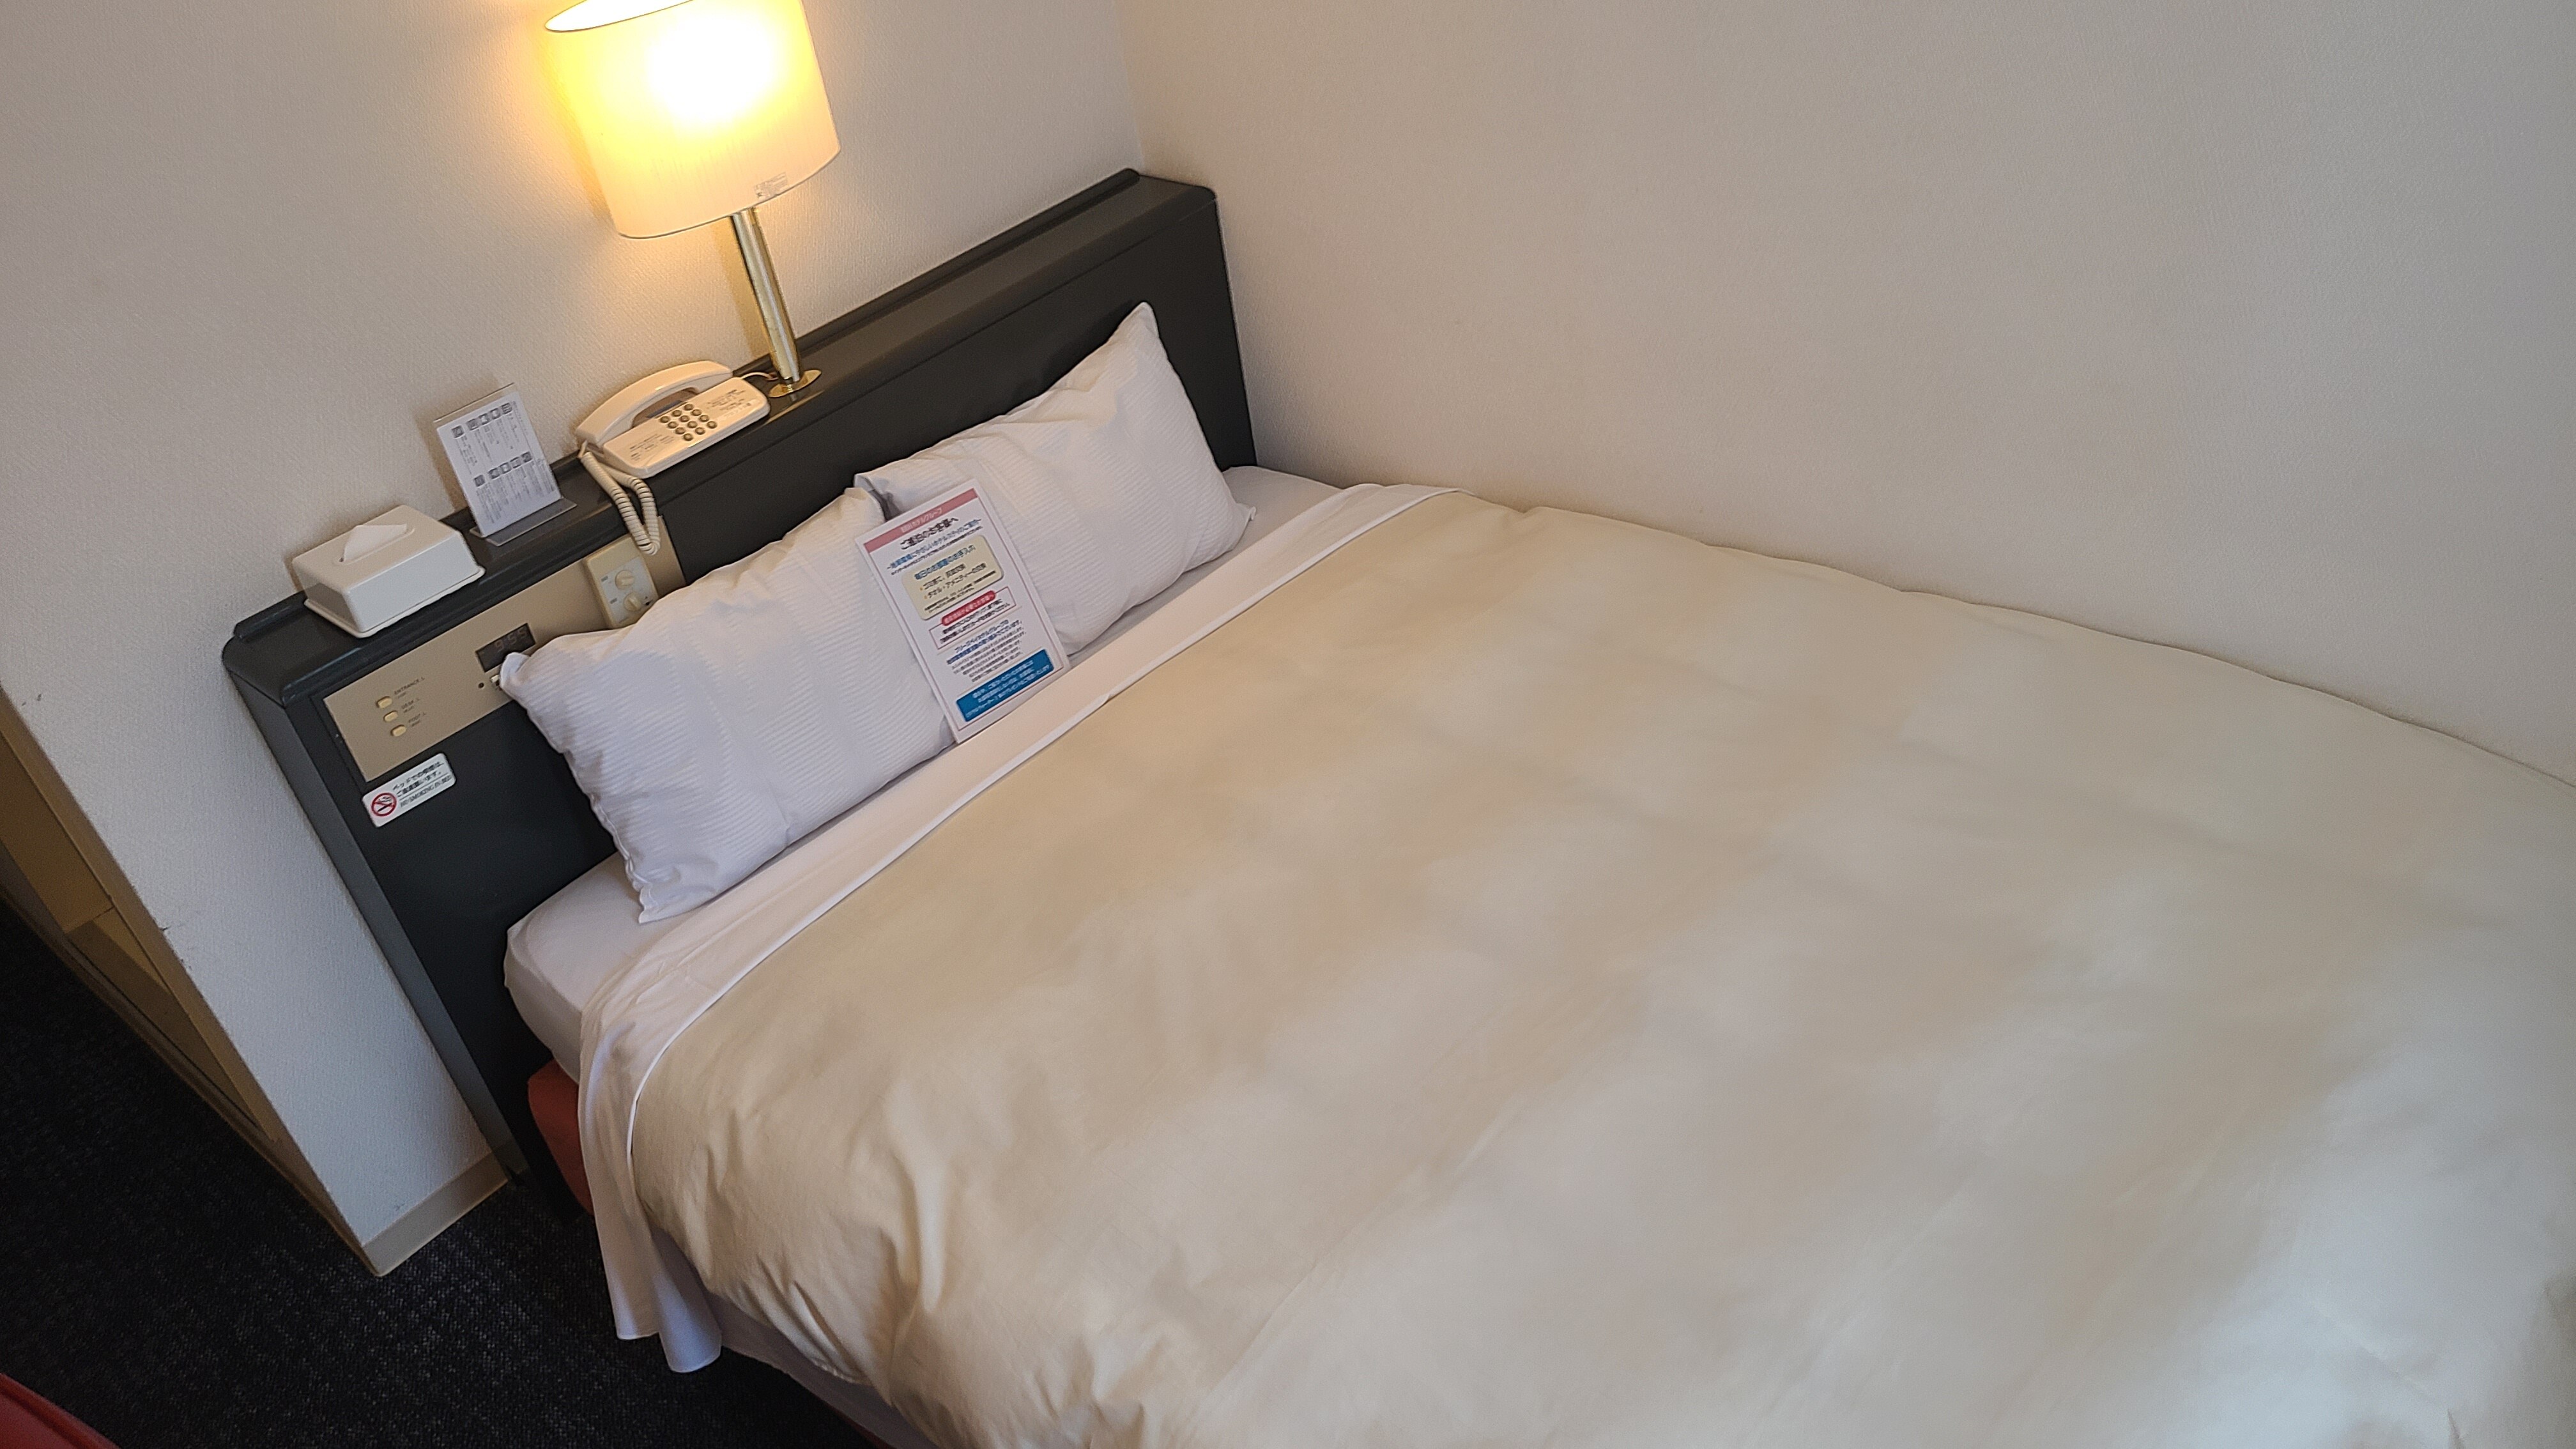 Deluxe single / double room 15.6 square meters